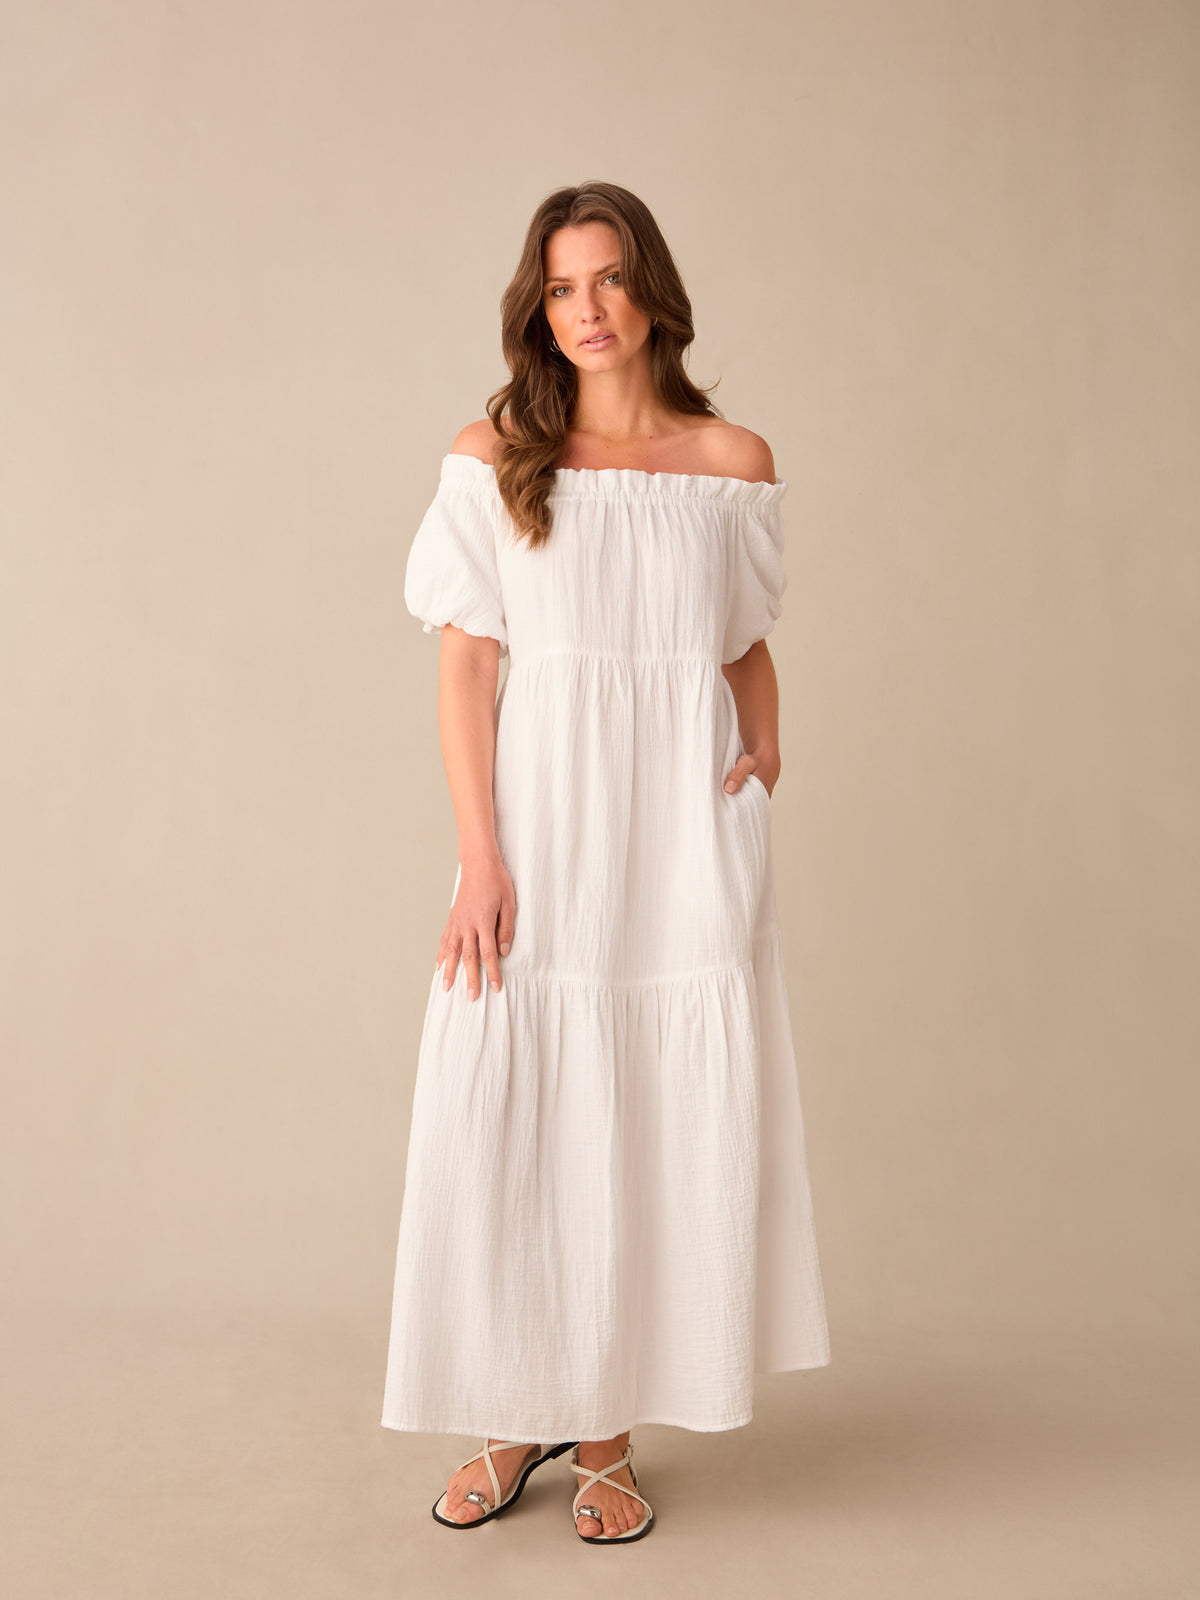 Petite White Off Shoulder Cheesecloth Dress